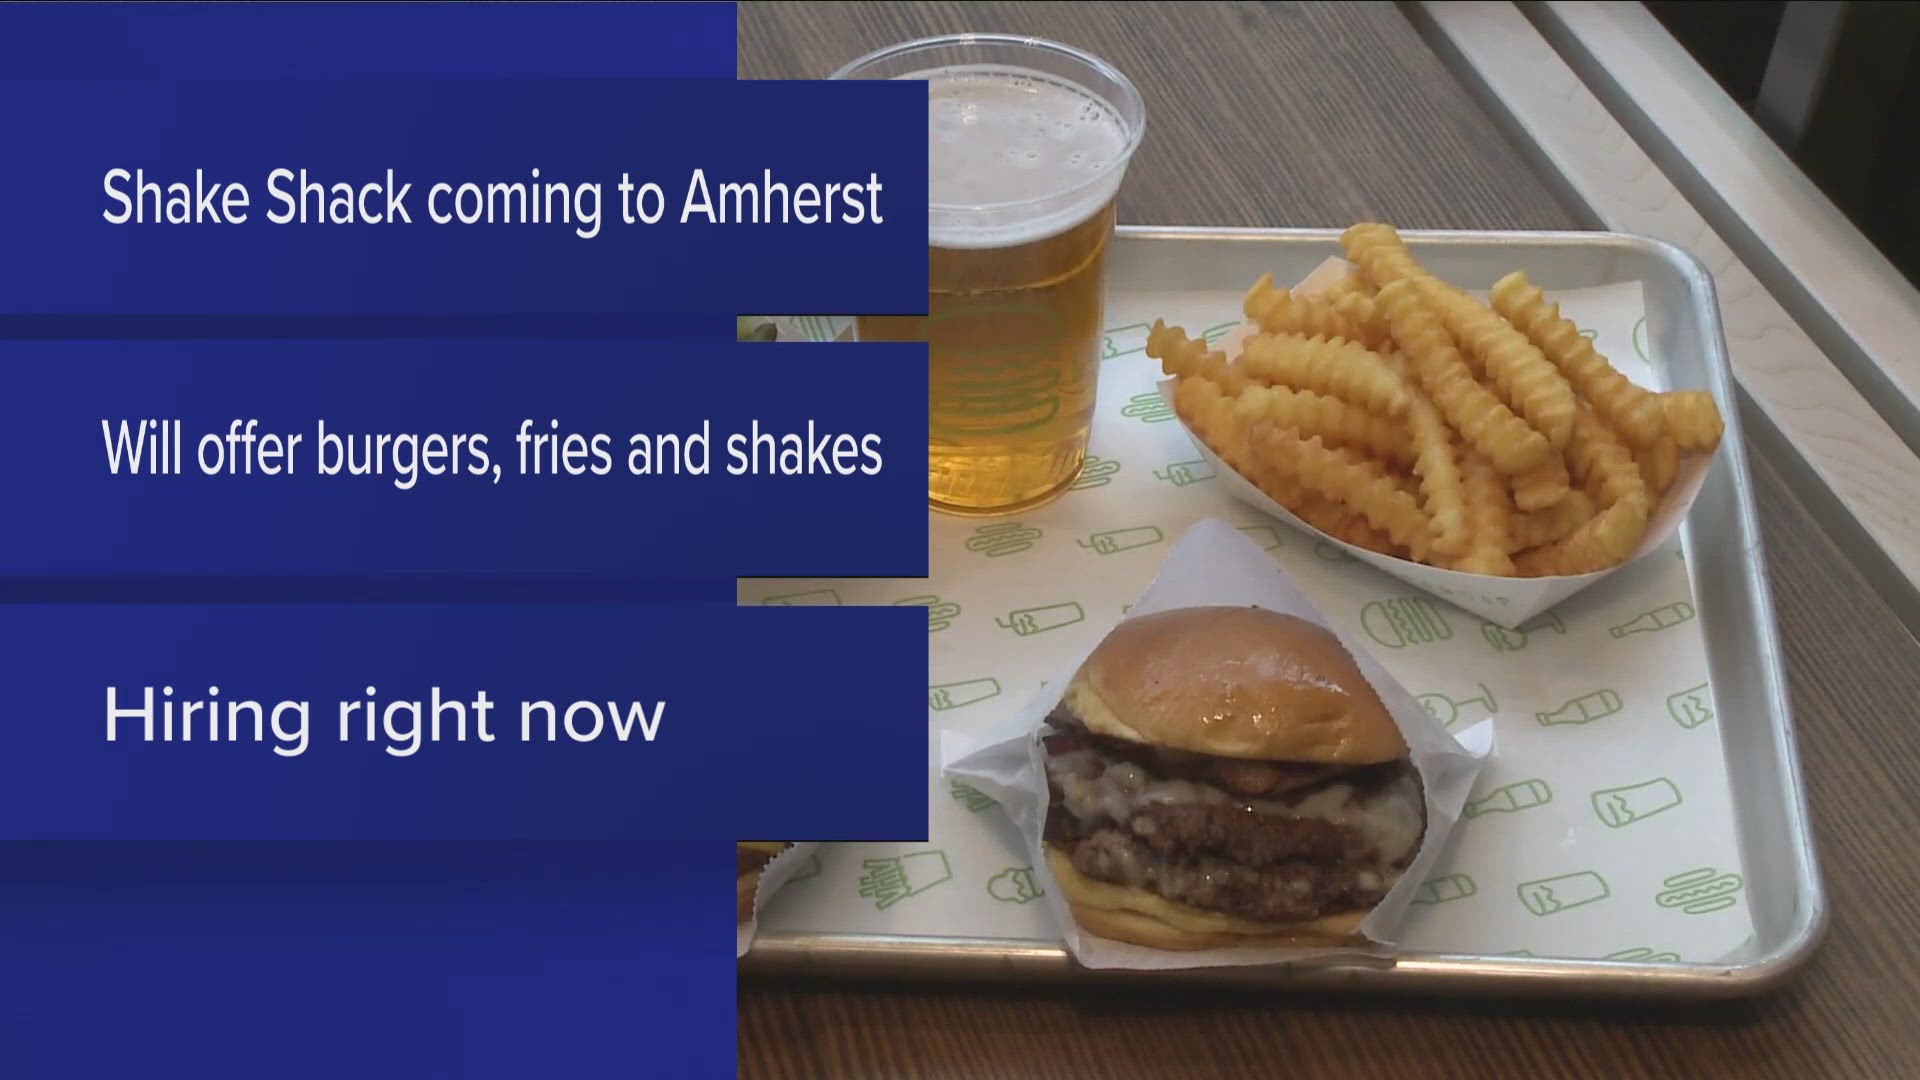 WE HAVE SOME BIG NEWS FOR Burger lovers!
Shake Shack IS COMING TO Boulevard's Consumer Square in Amherst.